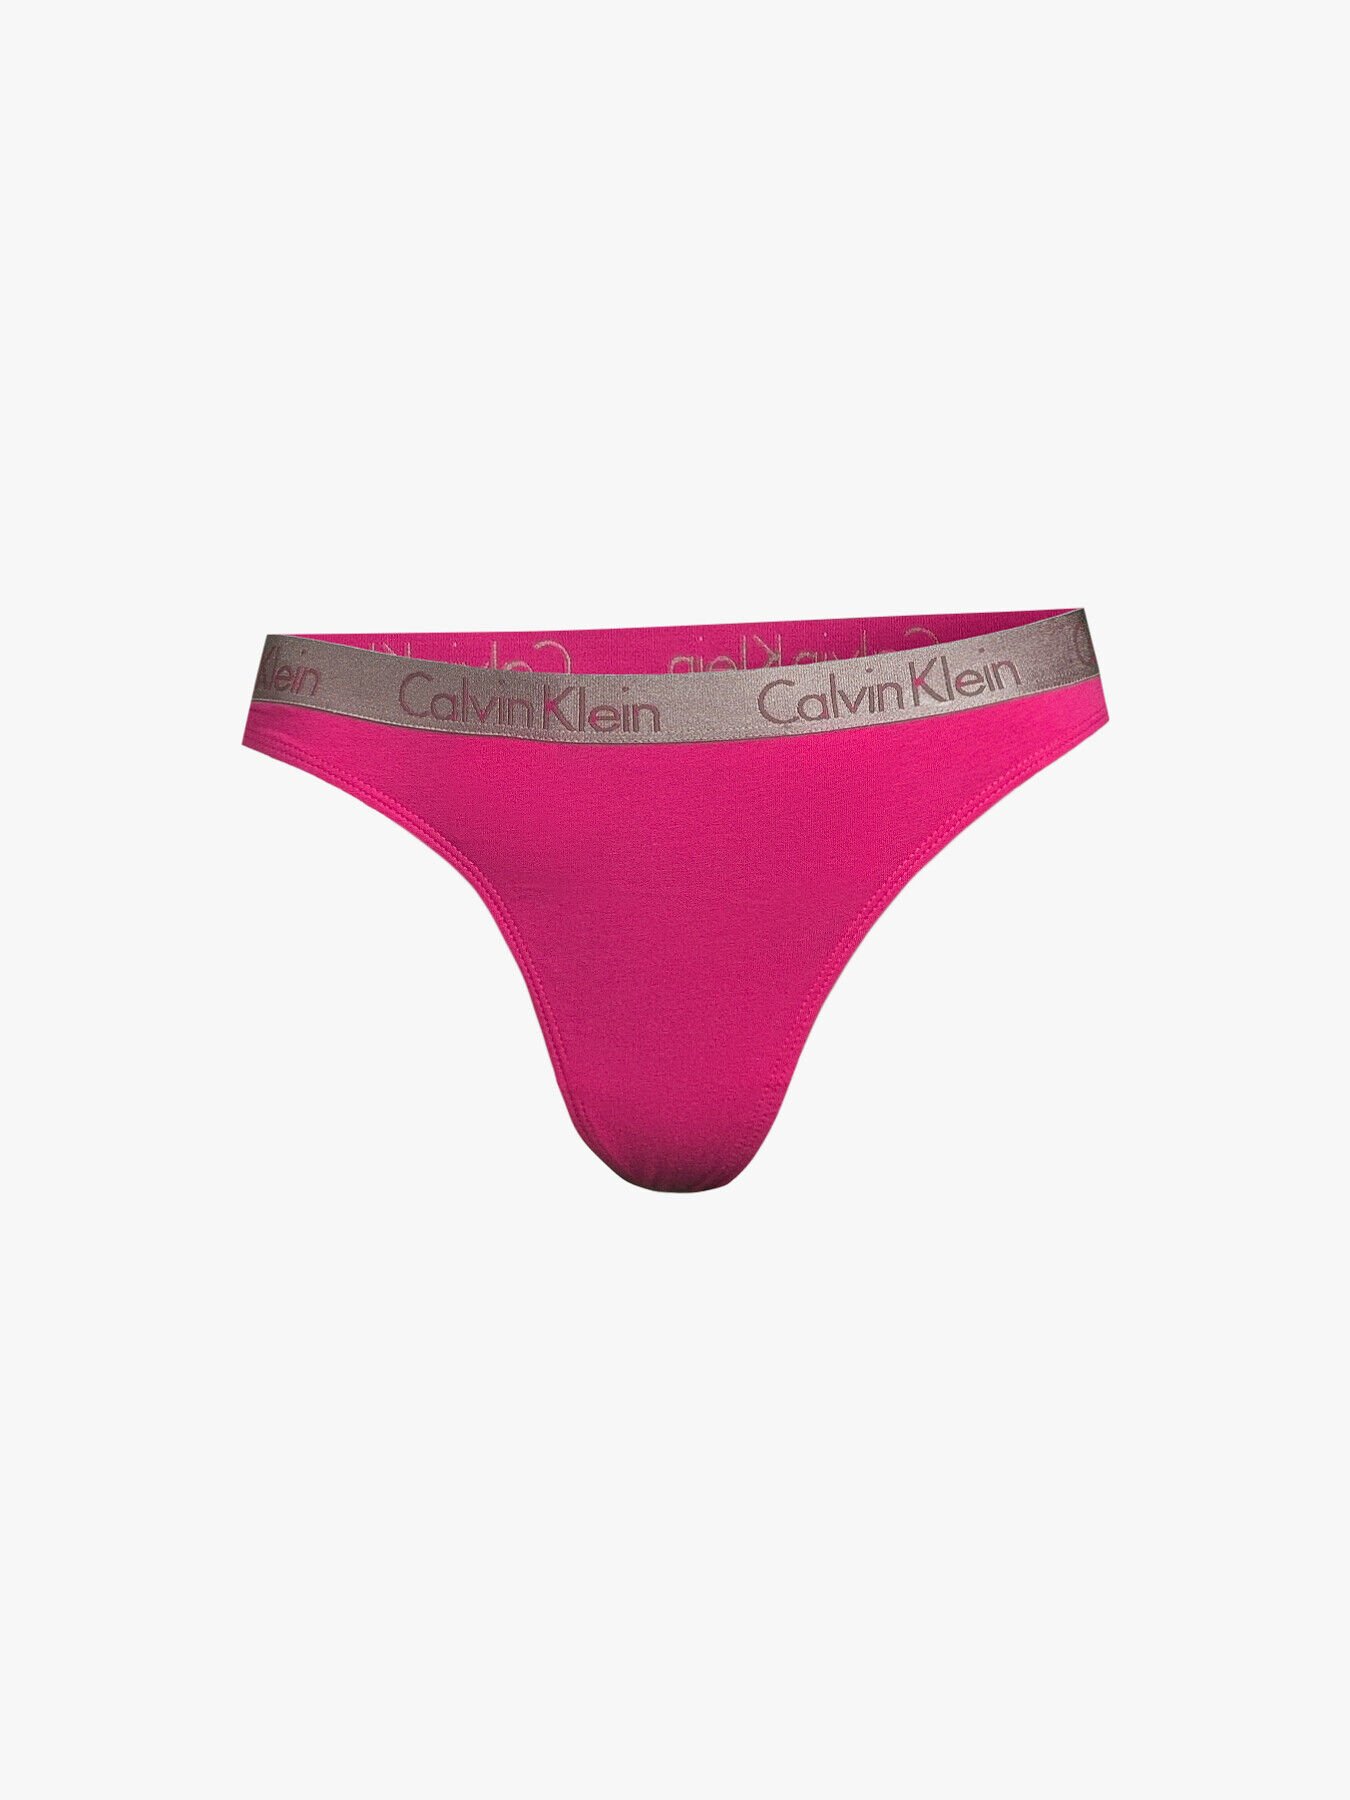 CALVIN KLEIN Radiant Cotton Thong in Very Berry